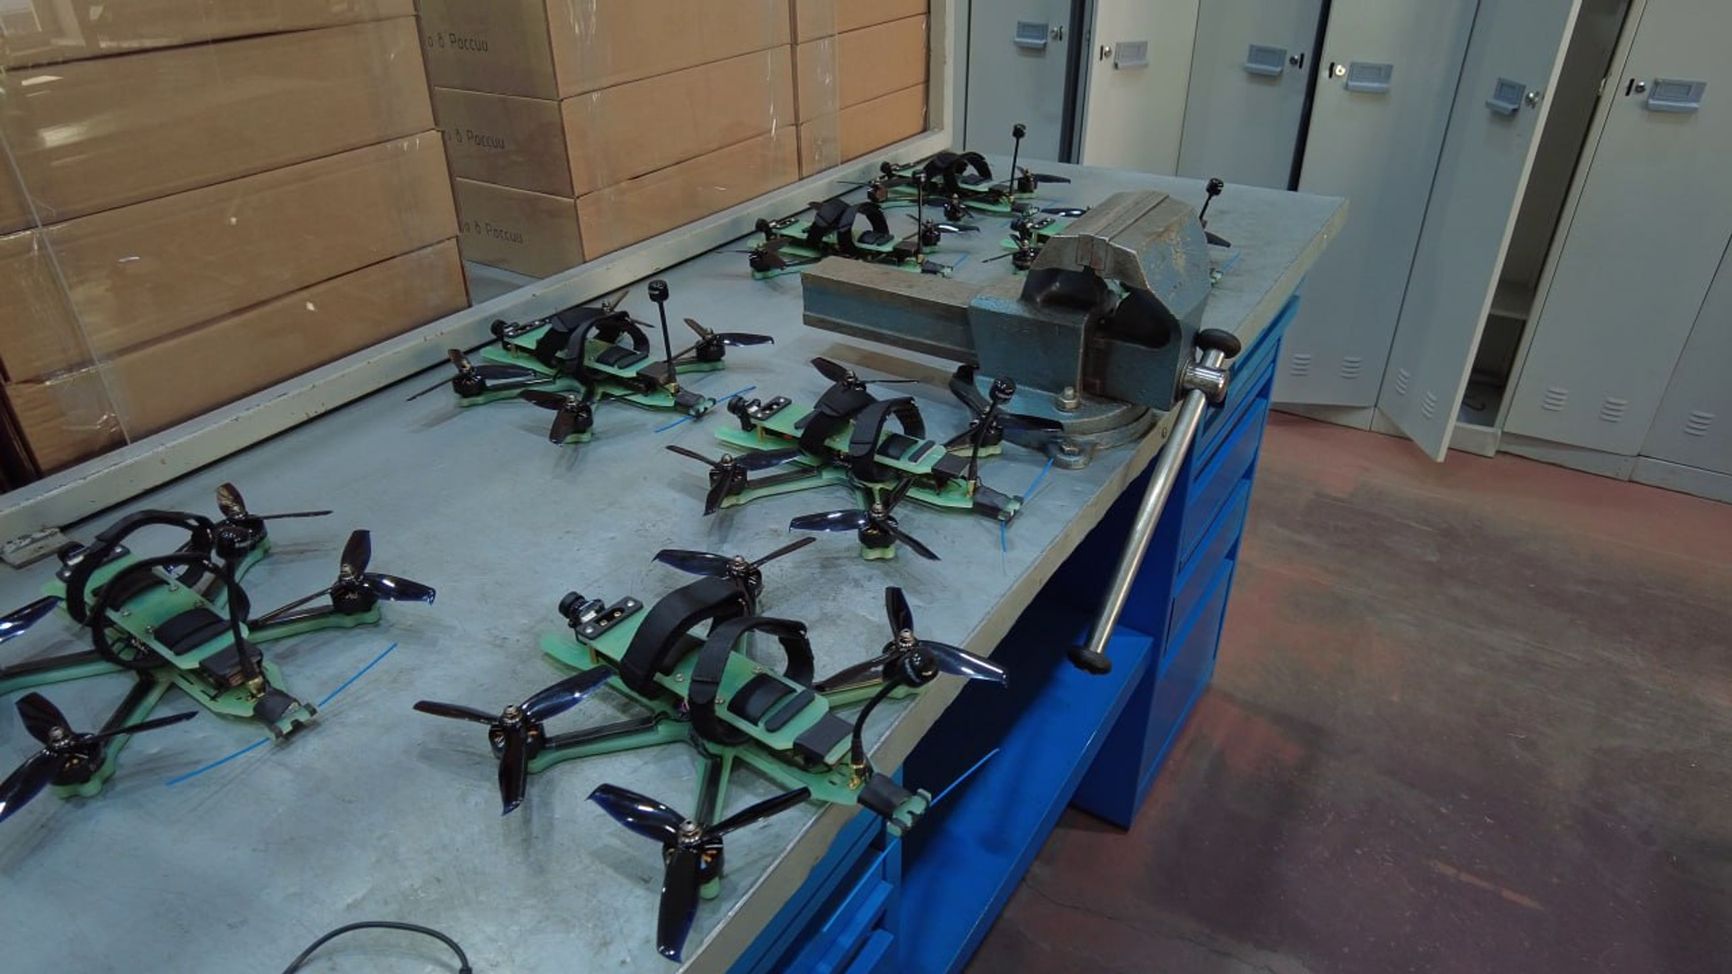 Drones for the Russian military assembled in Chukotka